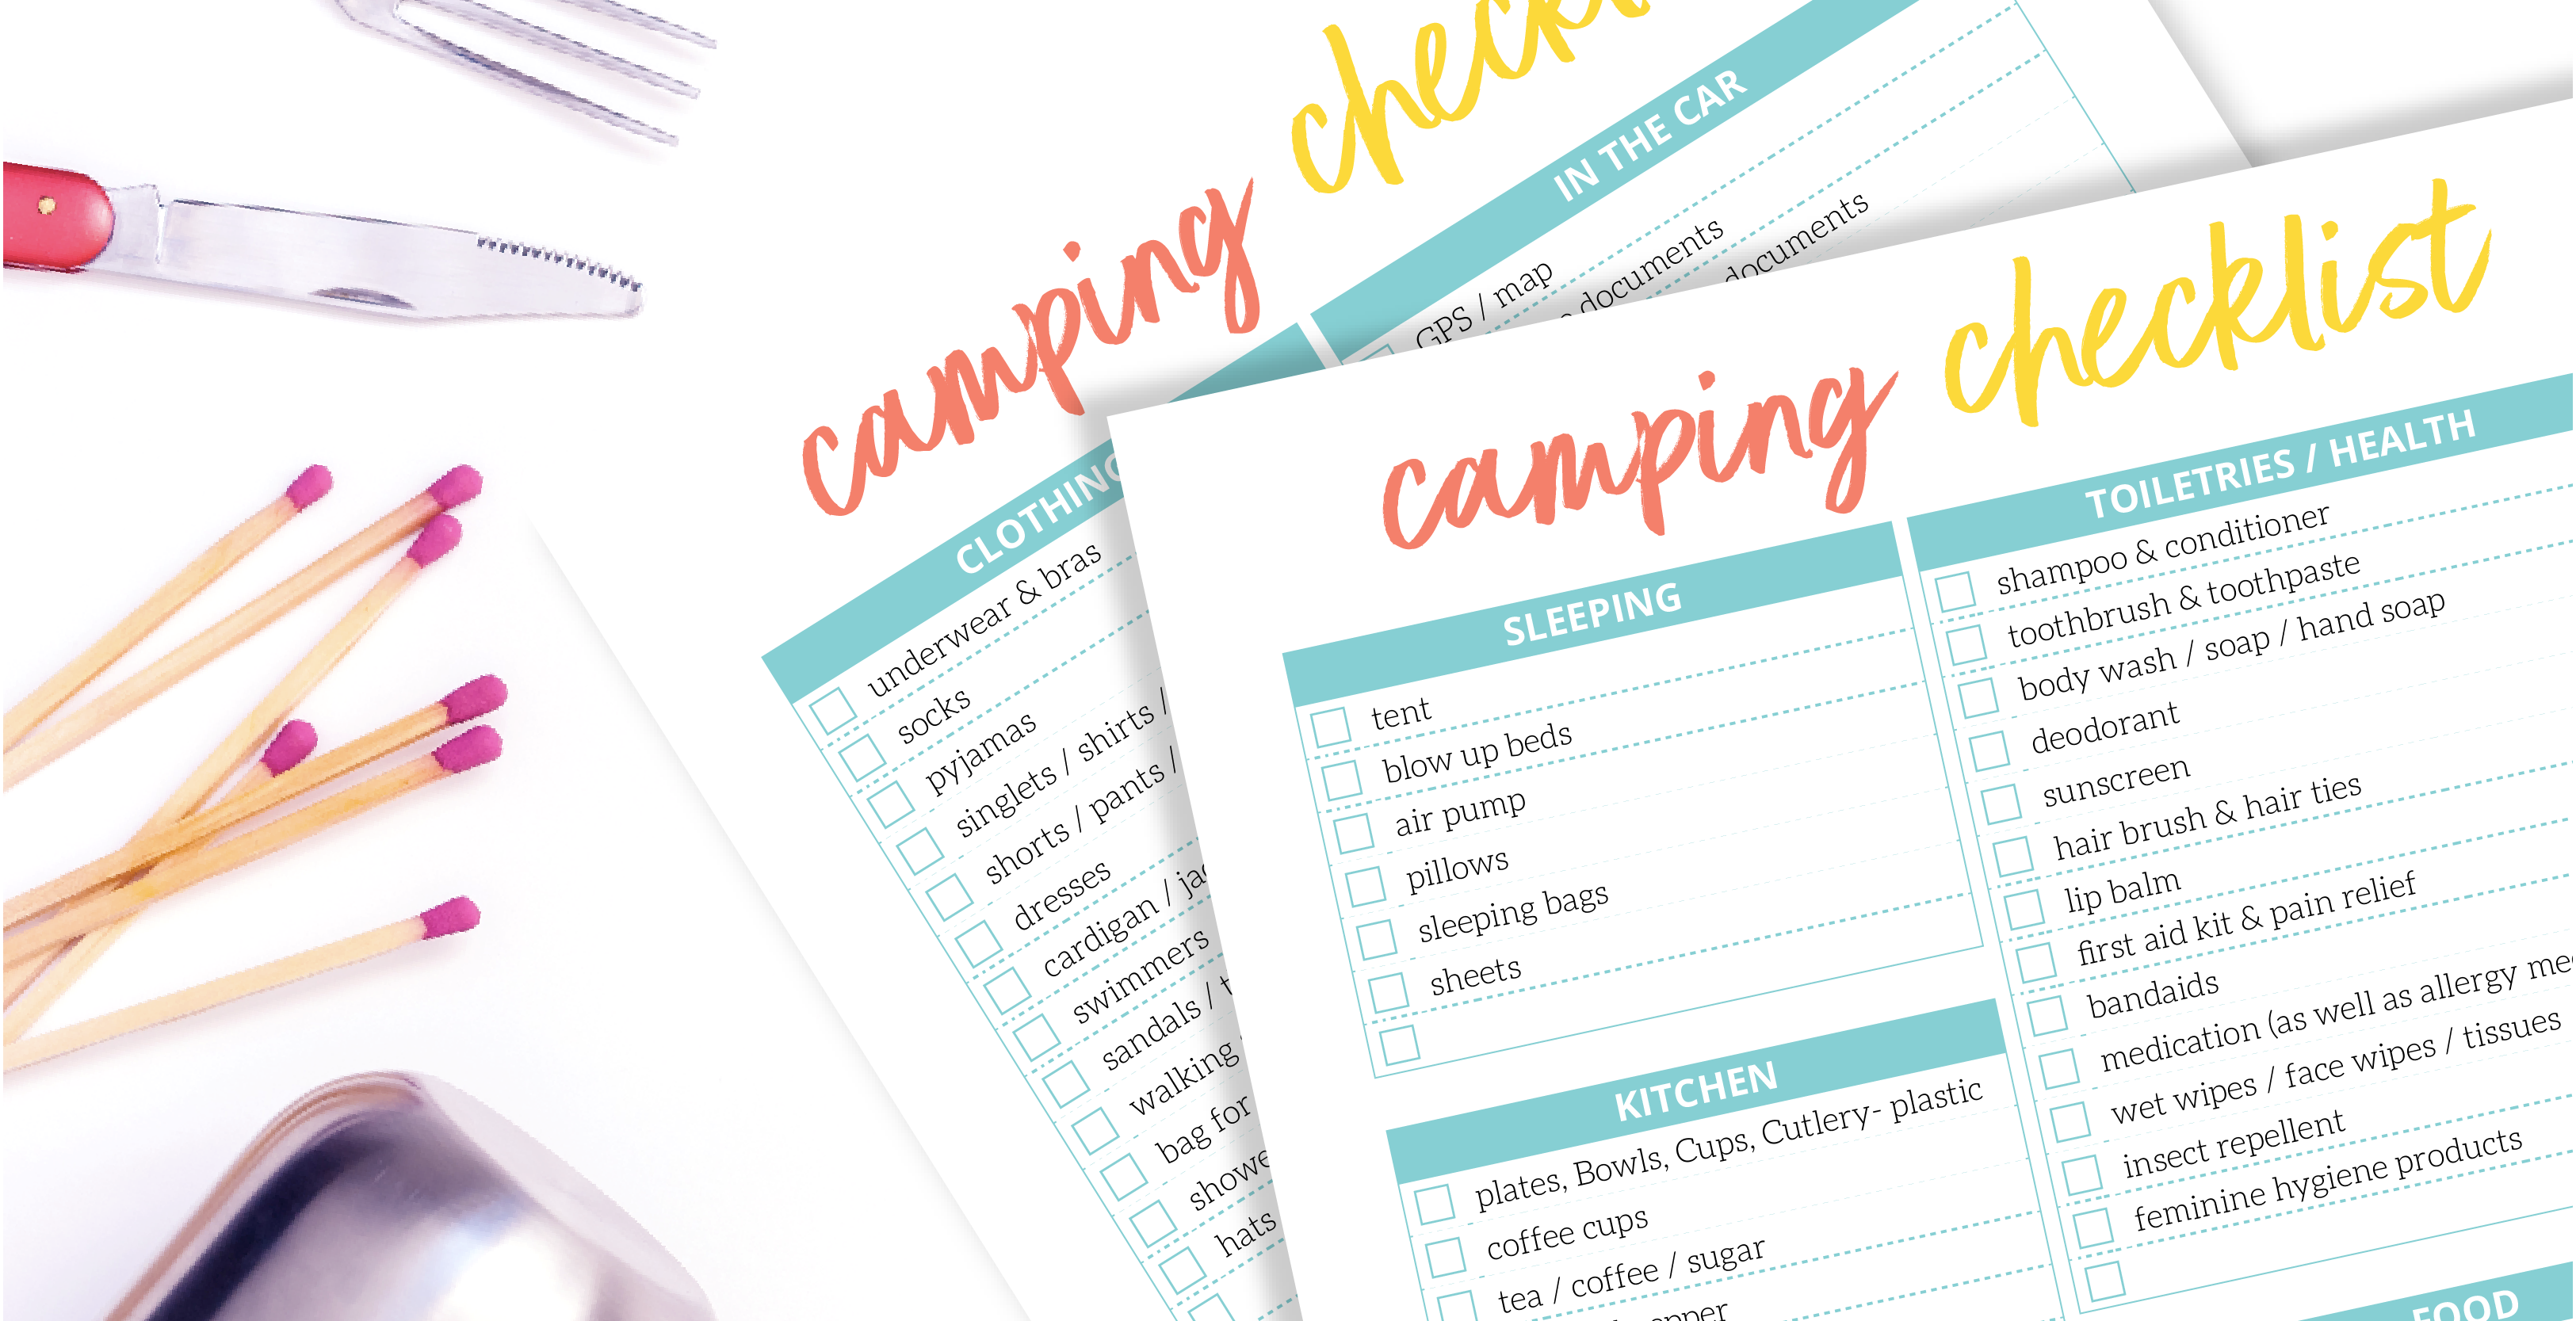 Family camping trip checklist instantly downloadable